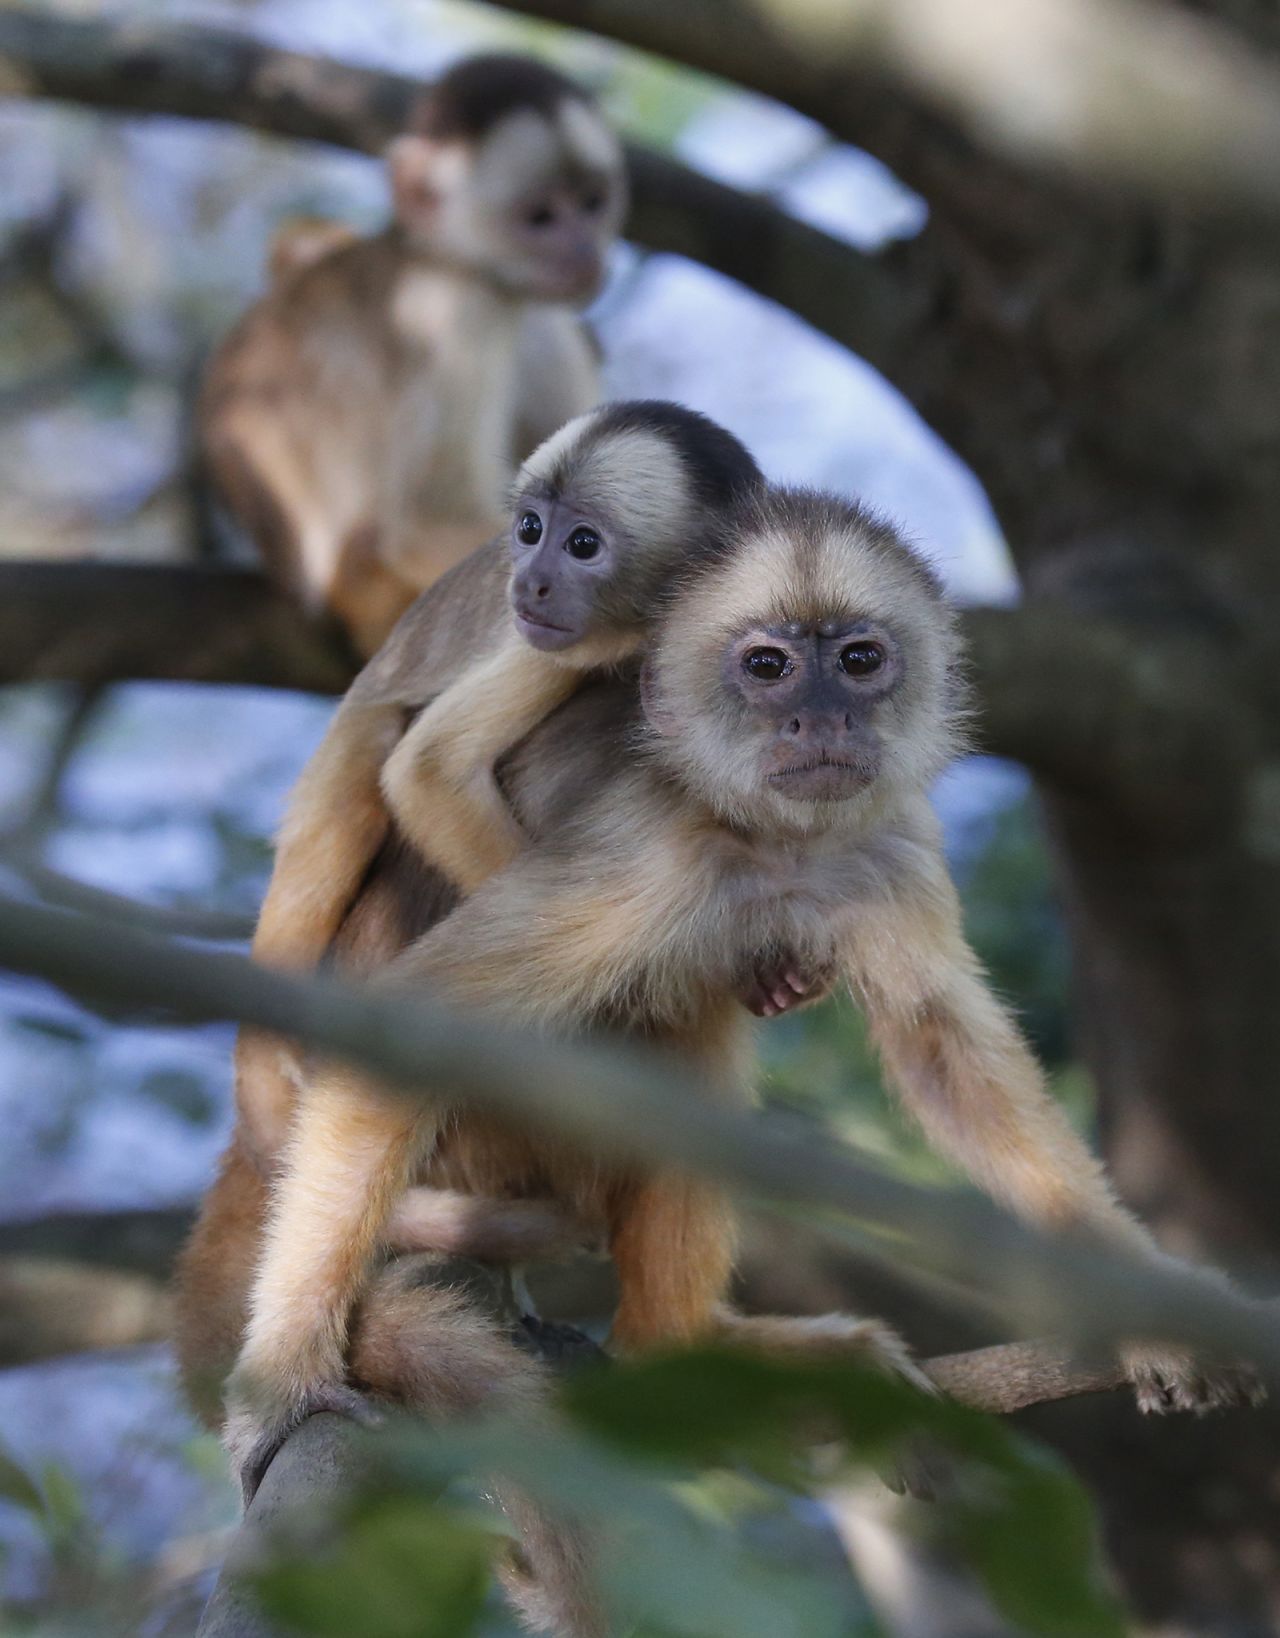 A white-fronted capuchin monkey carries its baby on its back. The monkeys usually live in large groups in the forest and communicate by calling to each other.